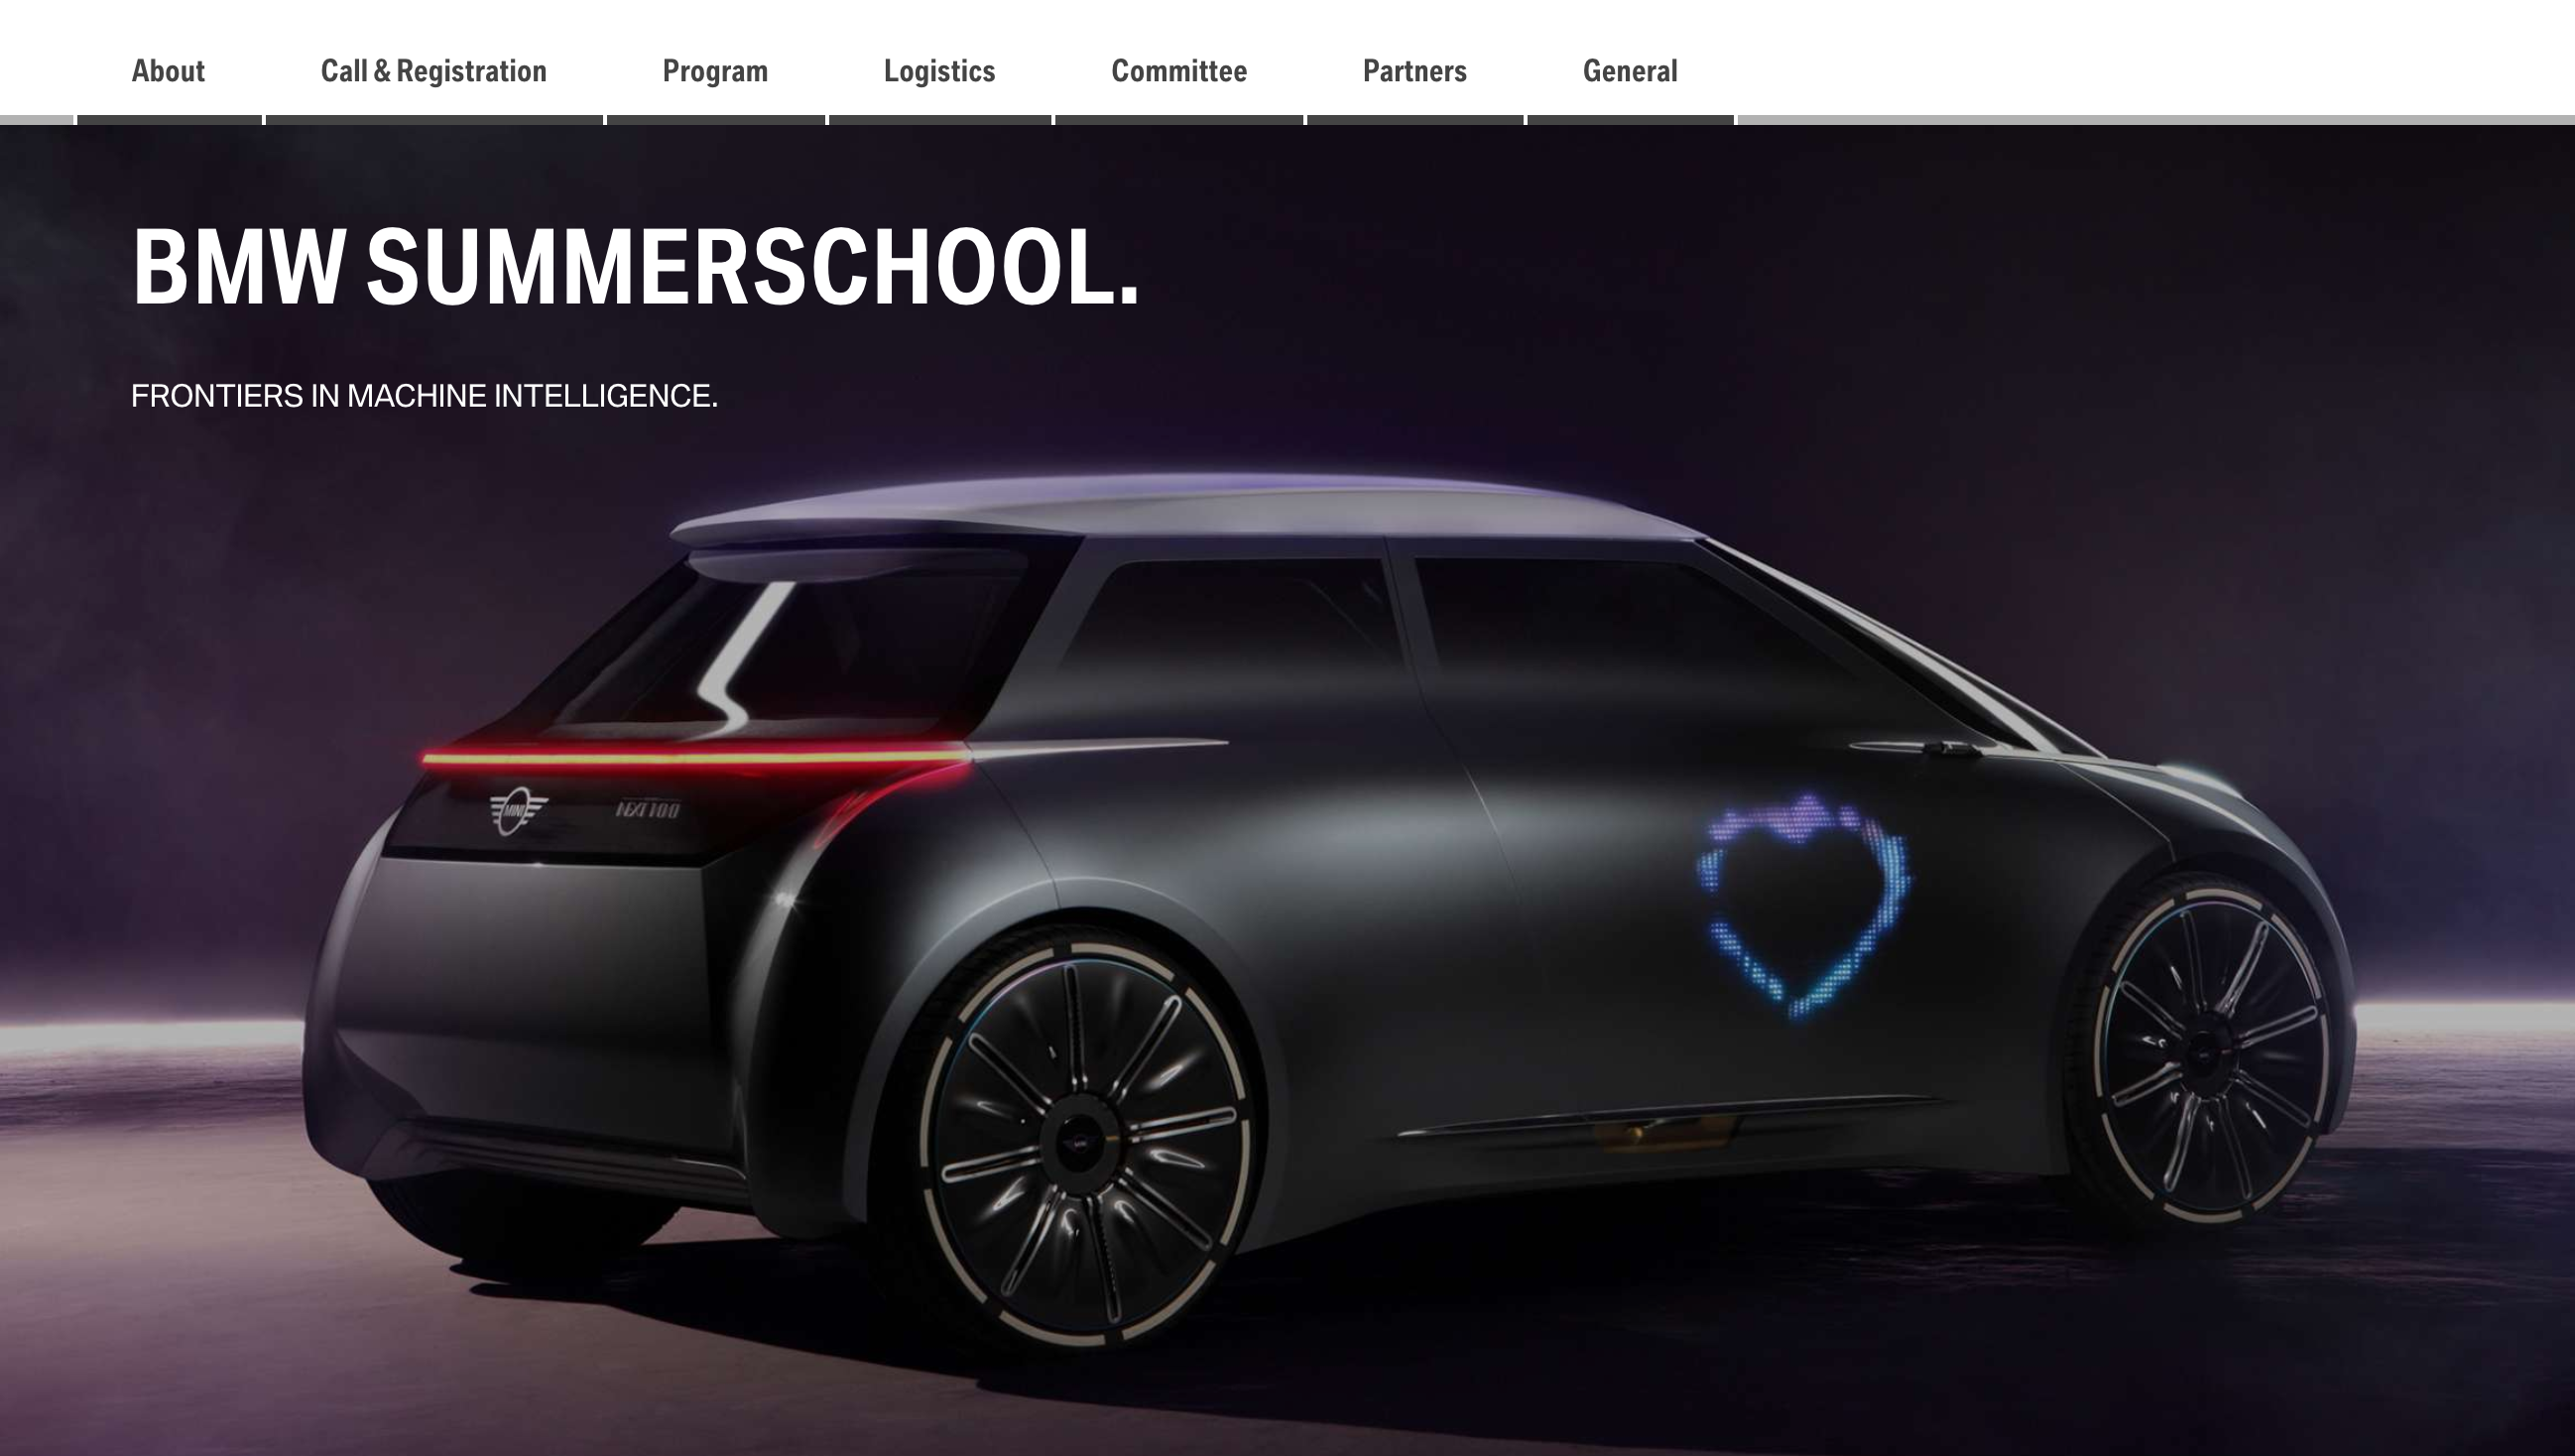 A portal designed to promote BMW’s training services